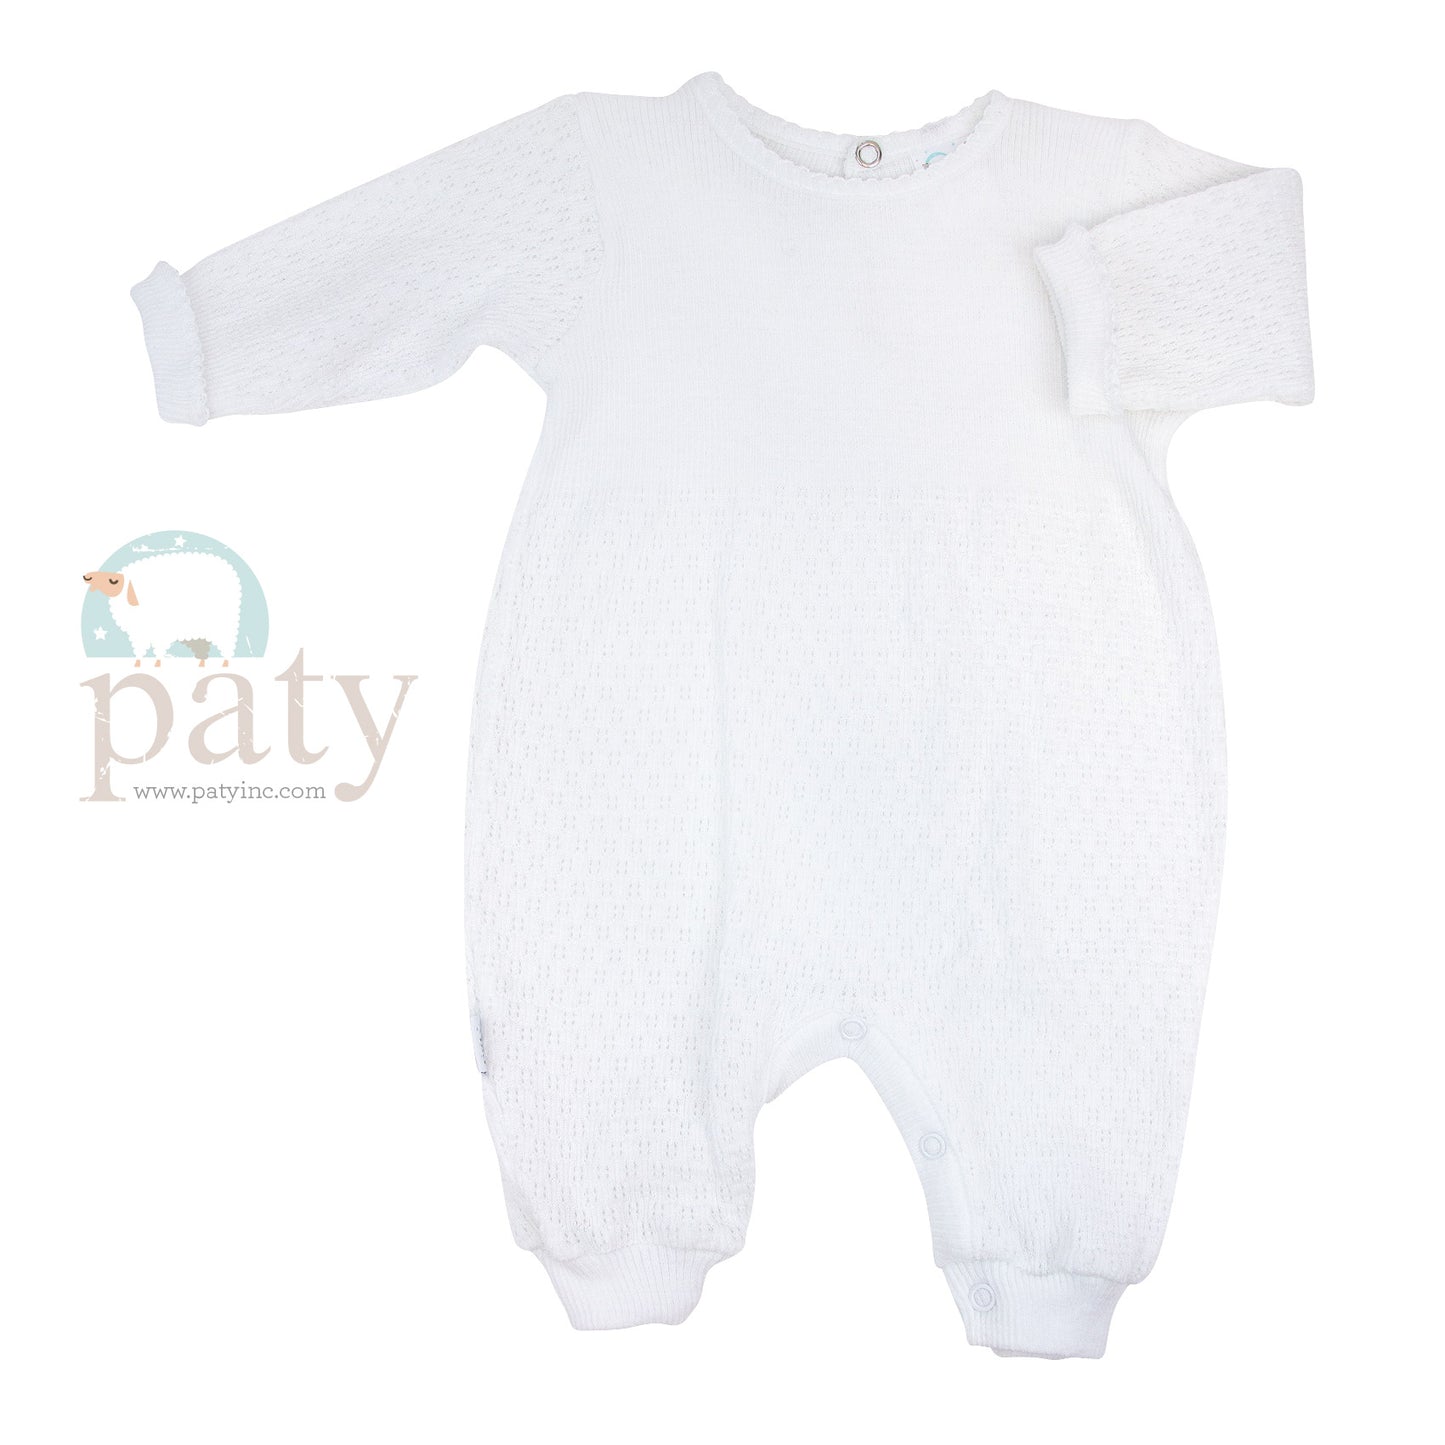 Paty - Romper LS Key Hold Back Solid White